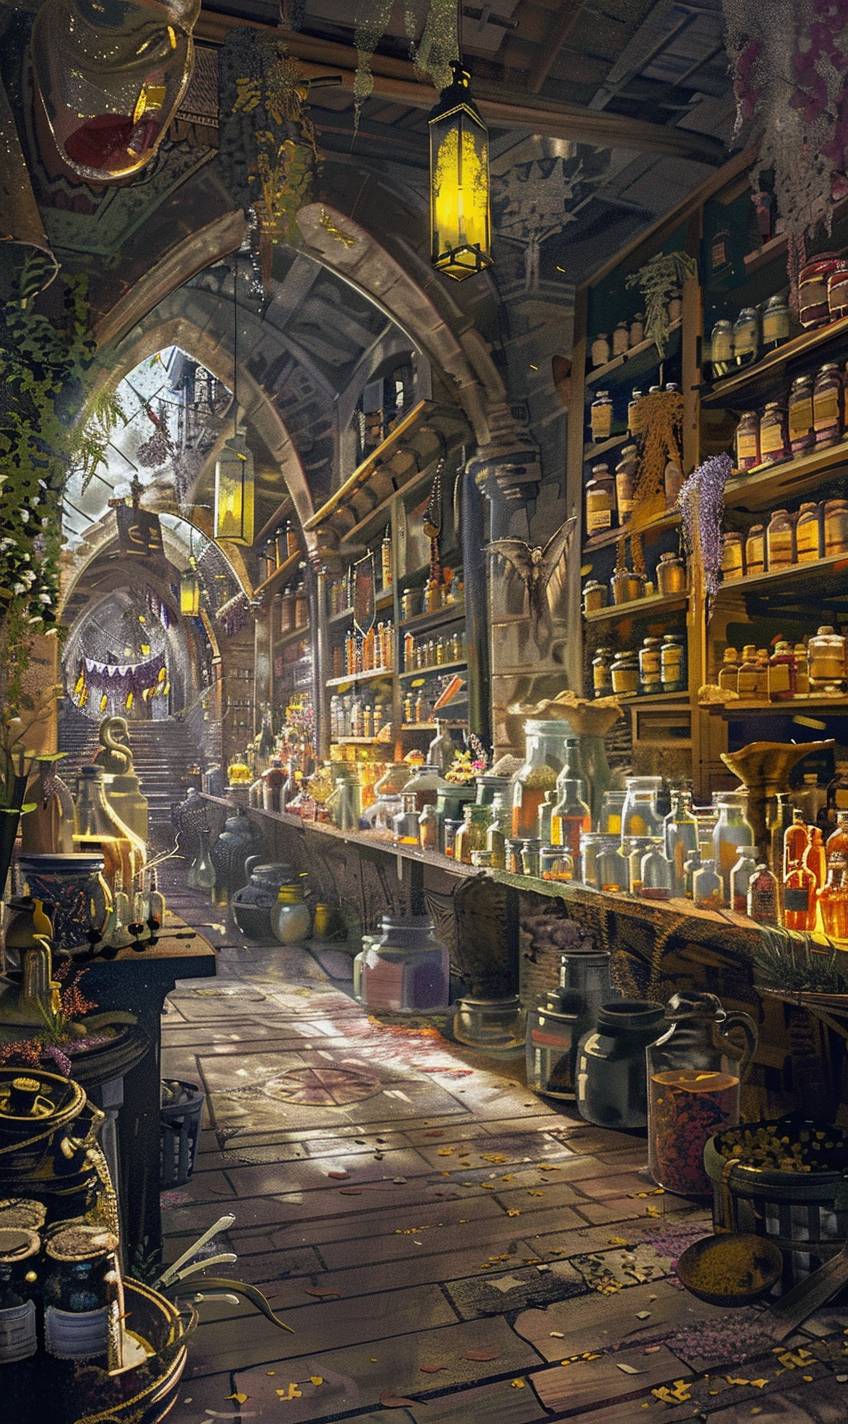 In the style of Claude Monet, a magical marketplace filled with potions and spells